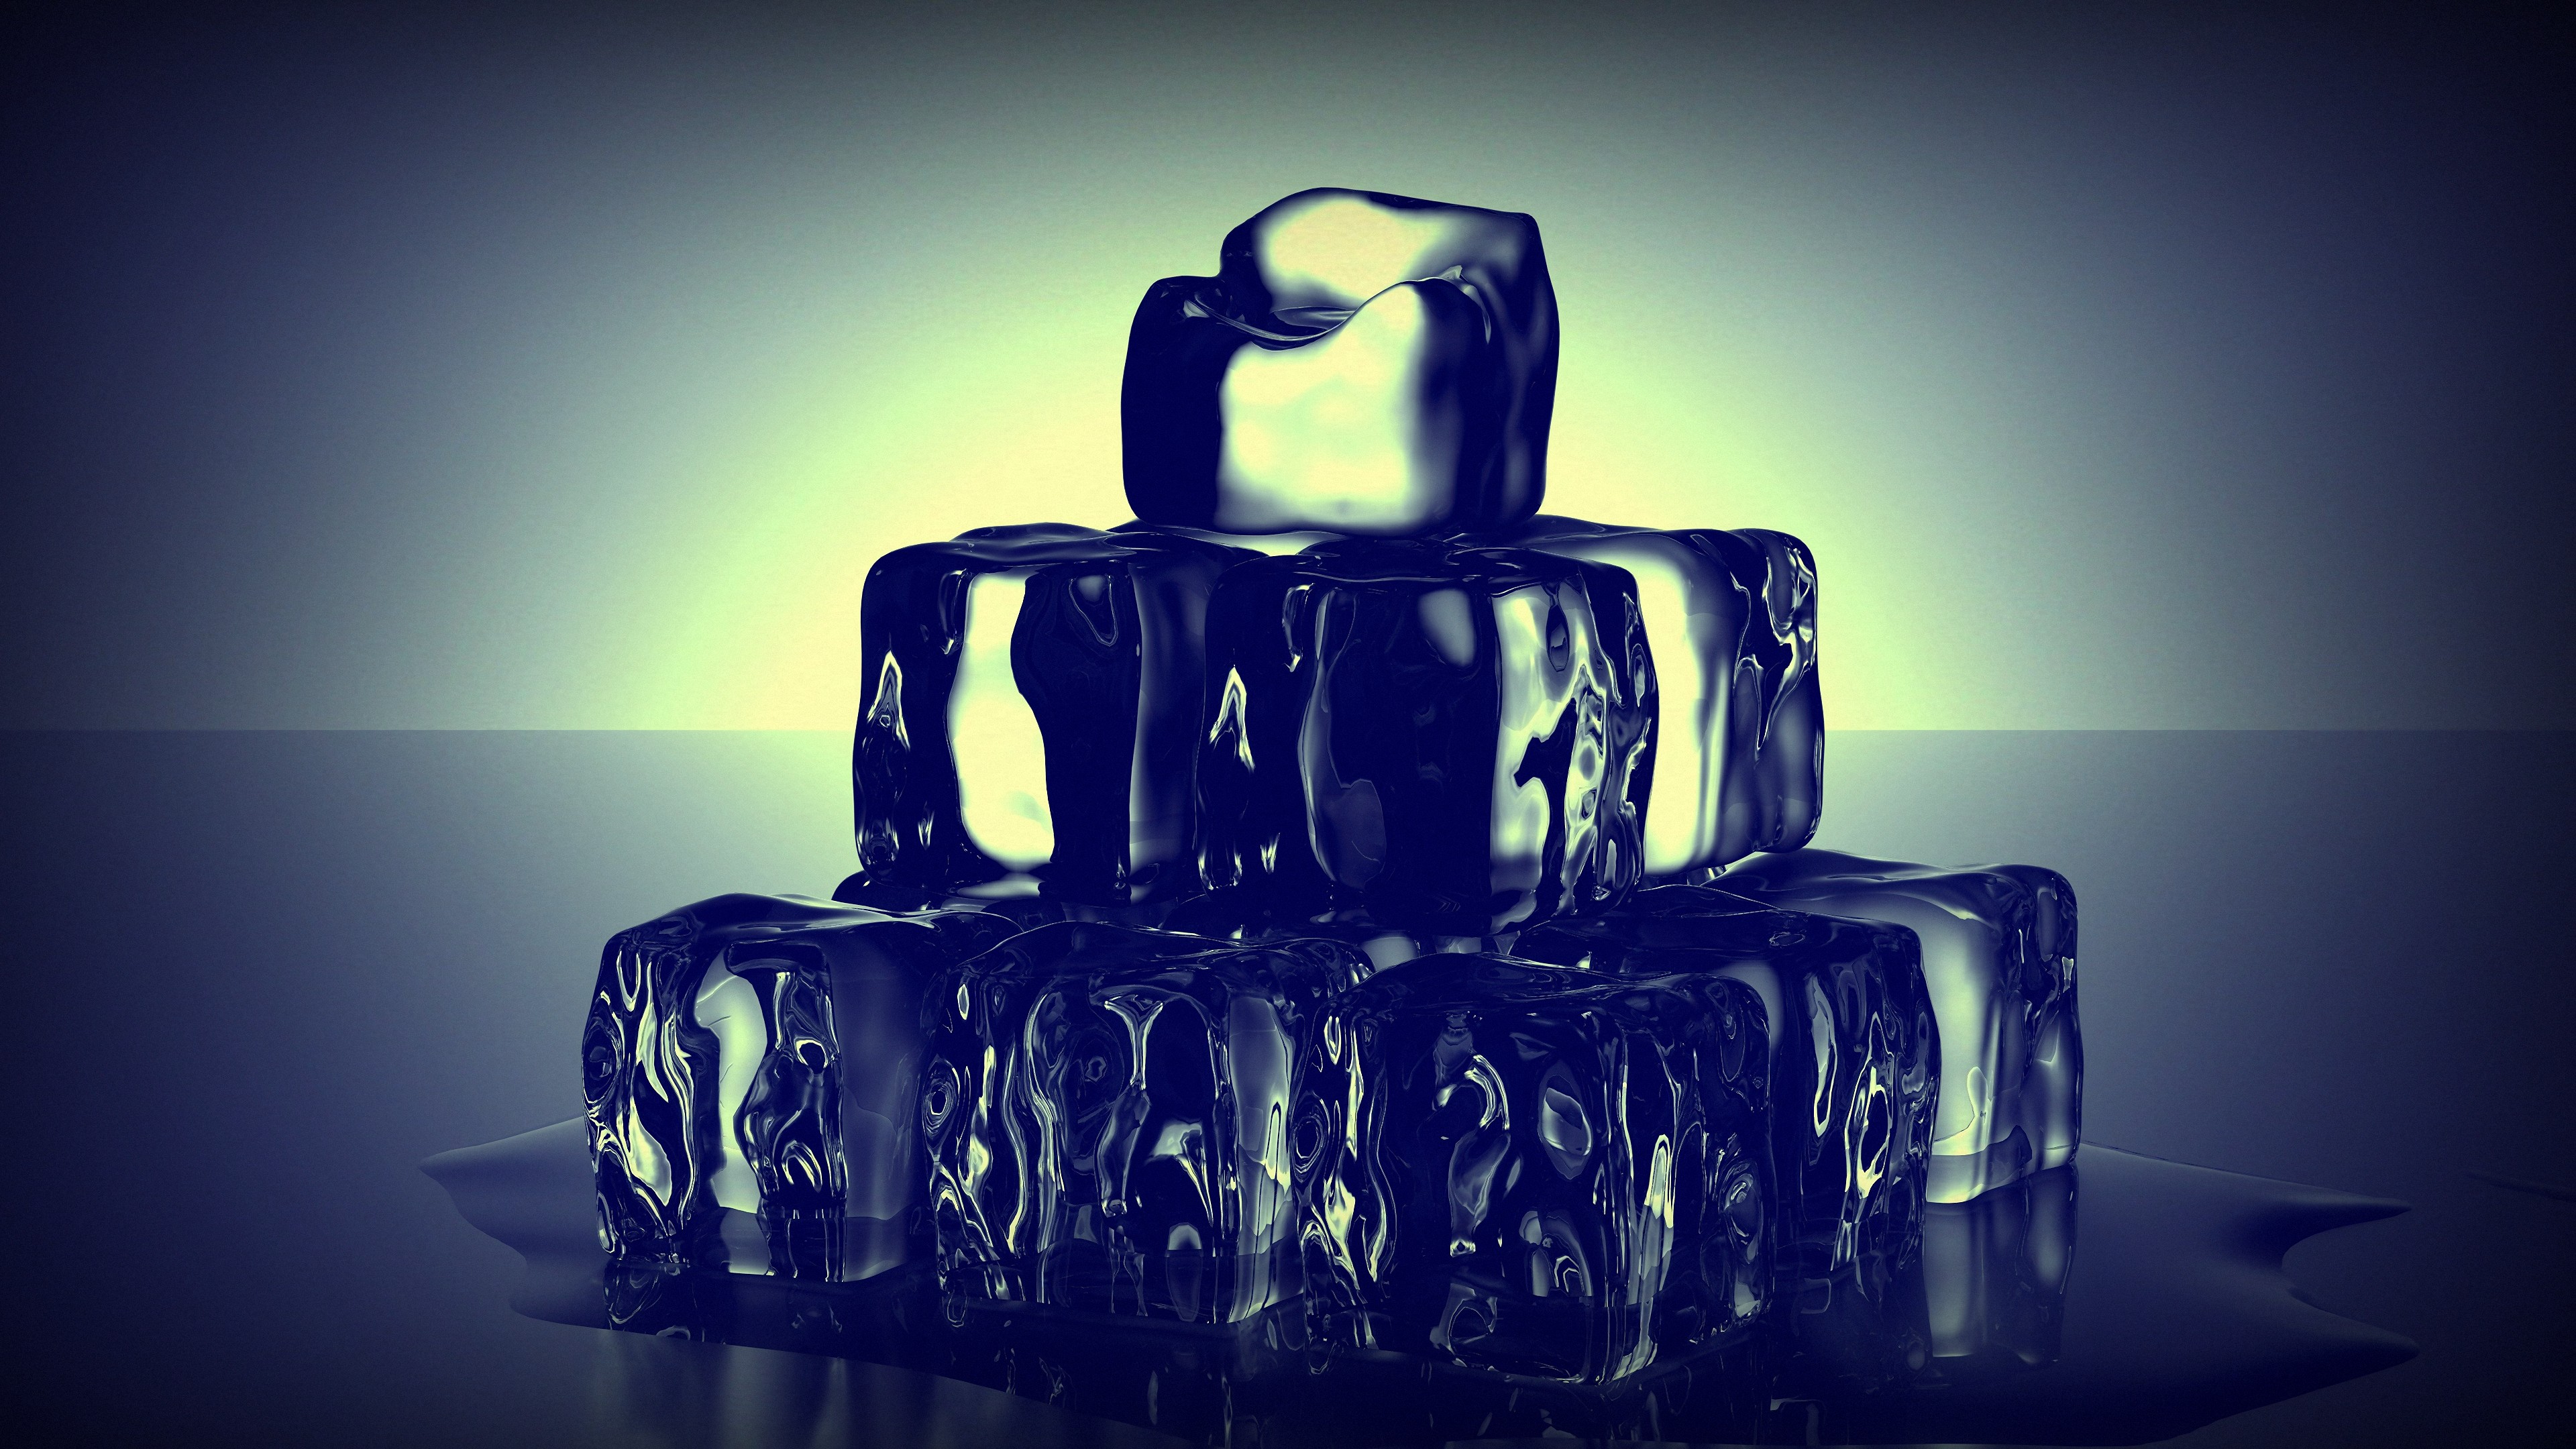 General 3840x2160 ice cubes cube blue white ice water dark